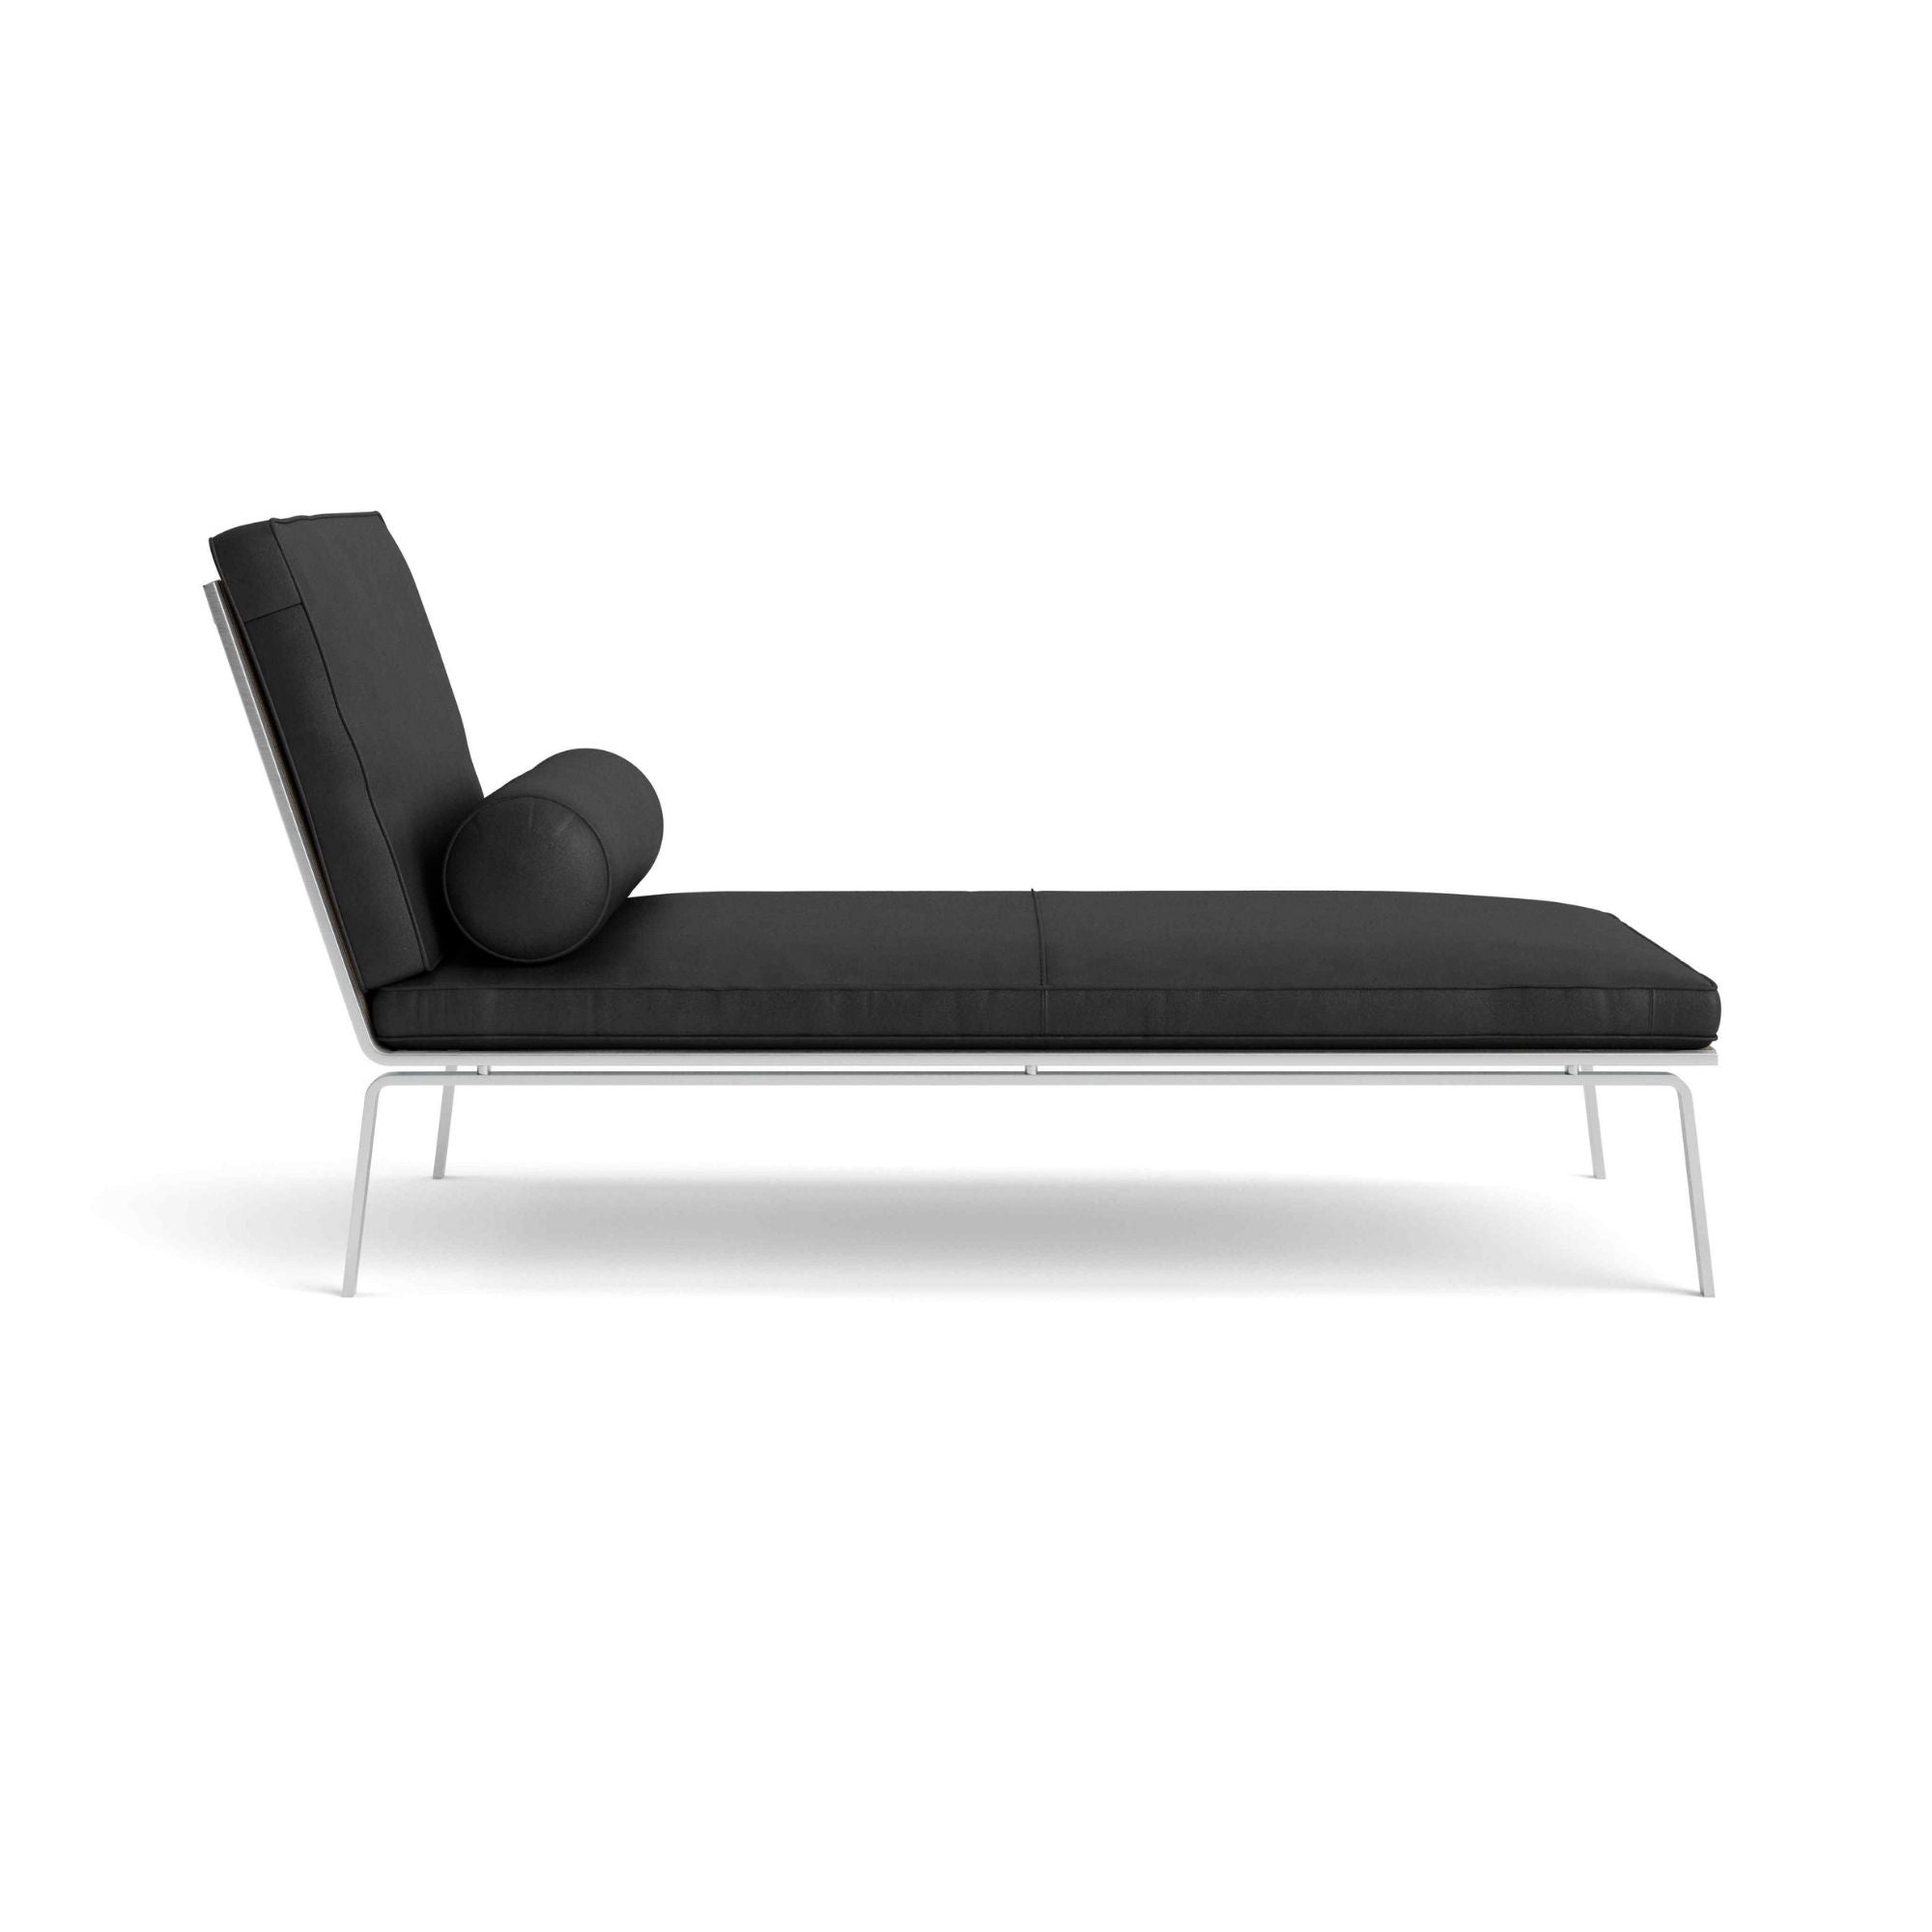 Man Chaise Lounge - Leather